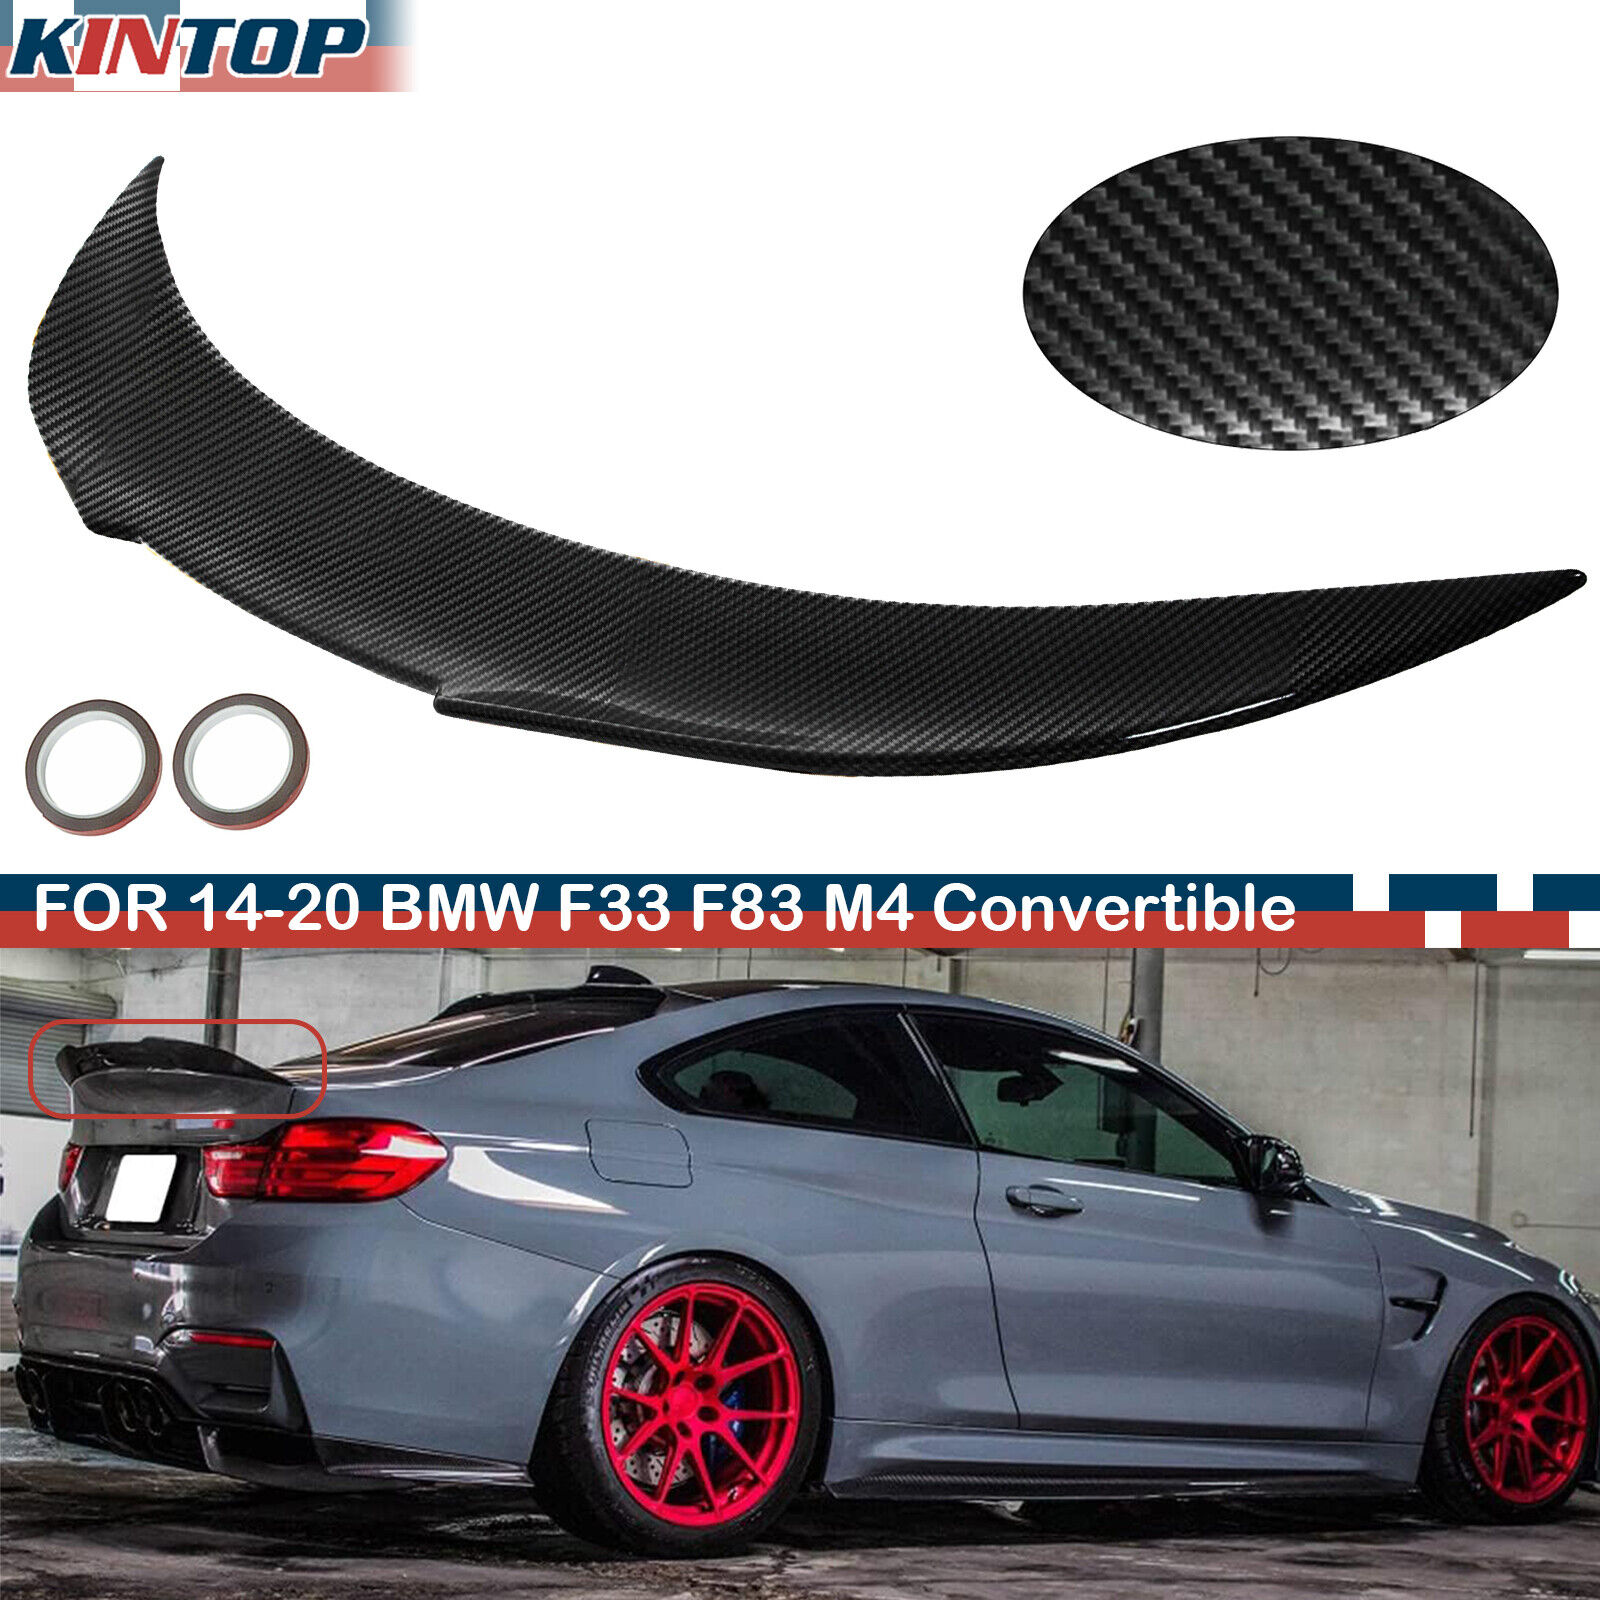 For 2014-2020 BMW F33 F83 M4 Convertible Carbon Fiber Rear Trunk Spoiler Wing